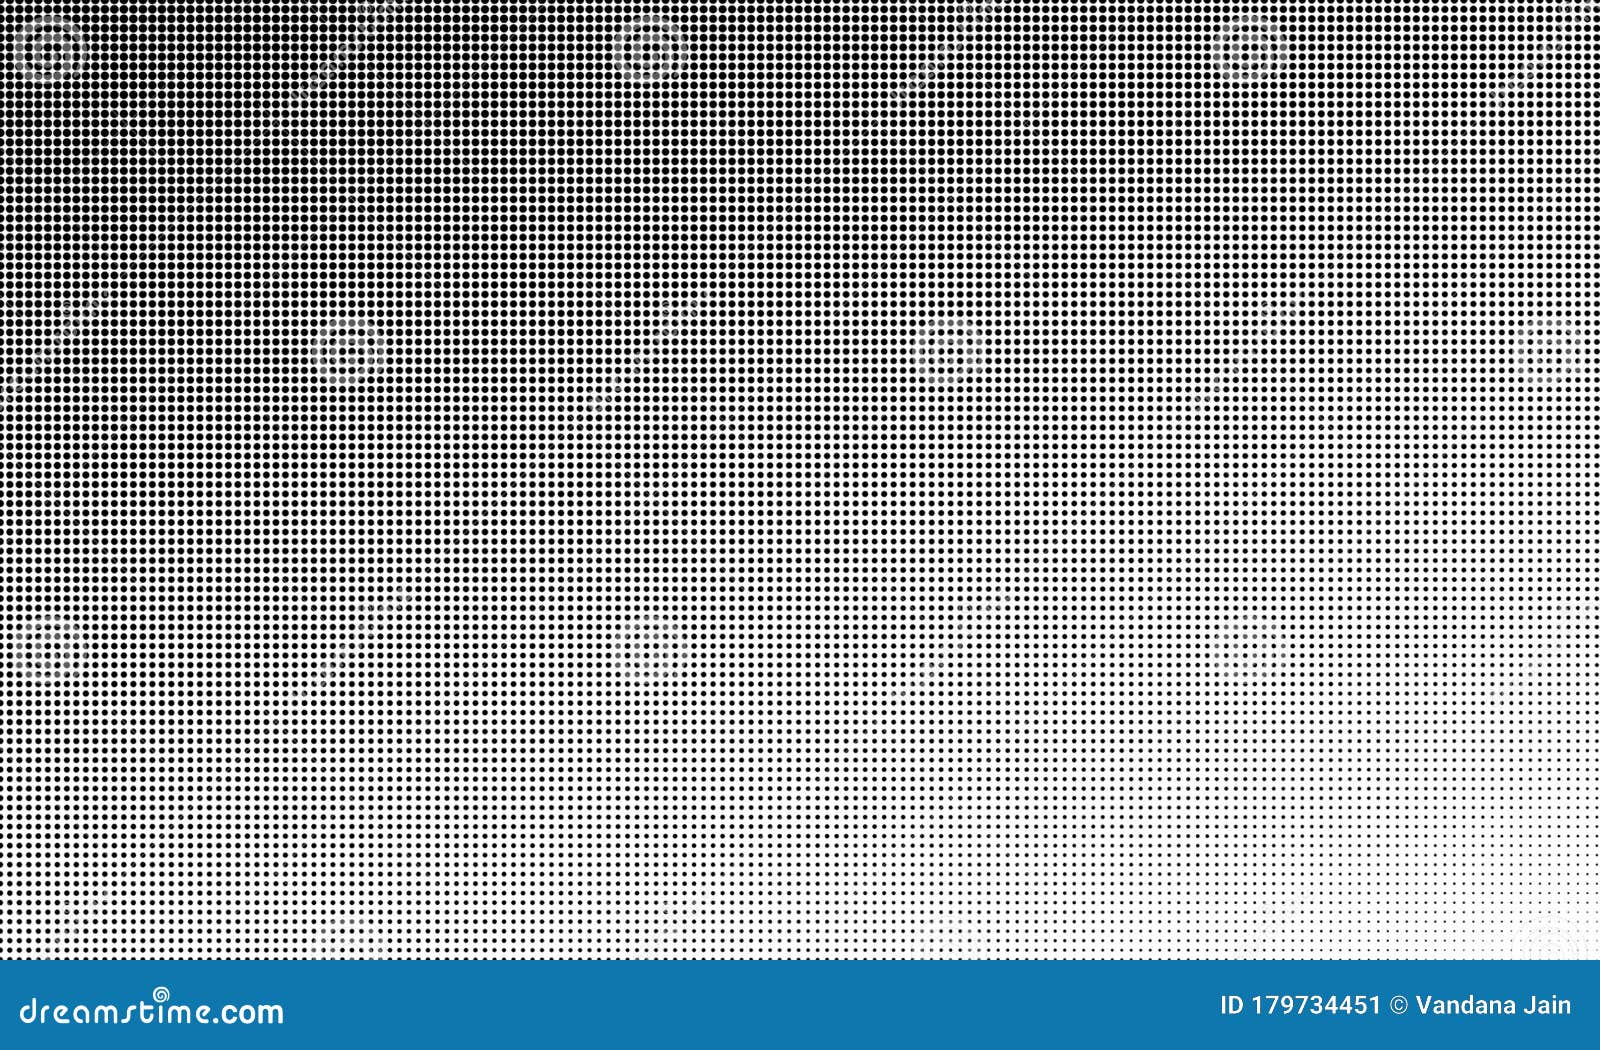 halftone pattern texture vector dots abstract background dotted banner white effect illusion gradient place text 179734451